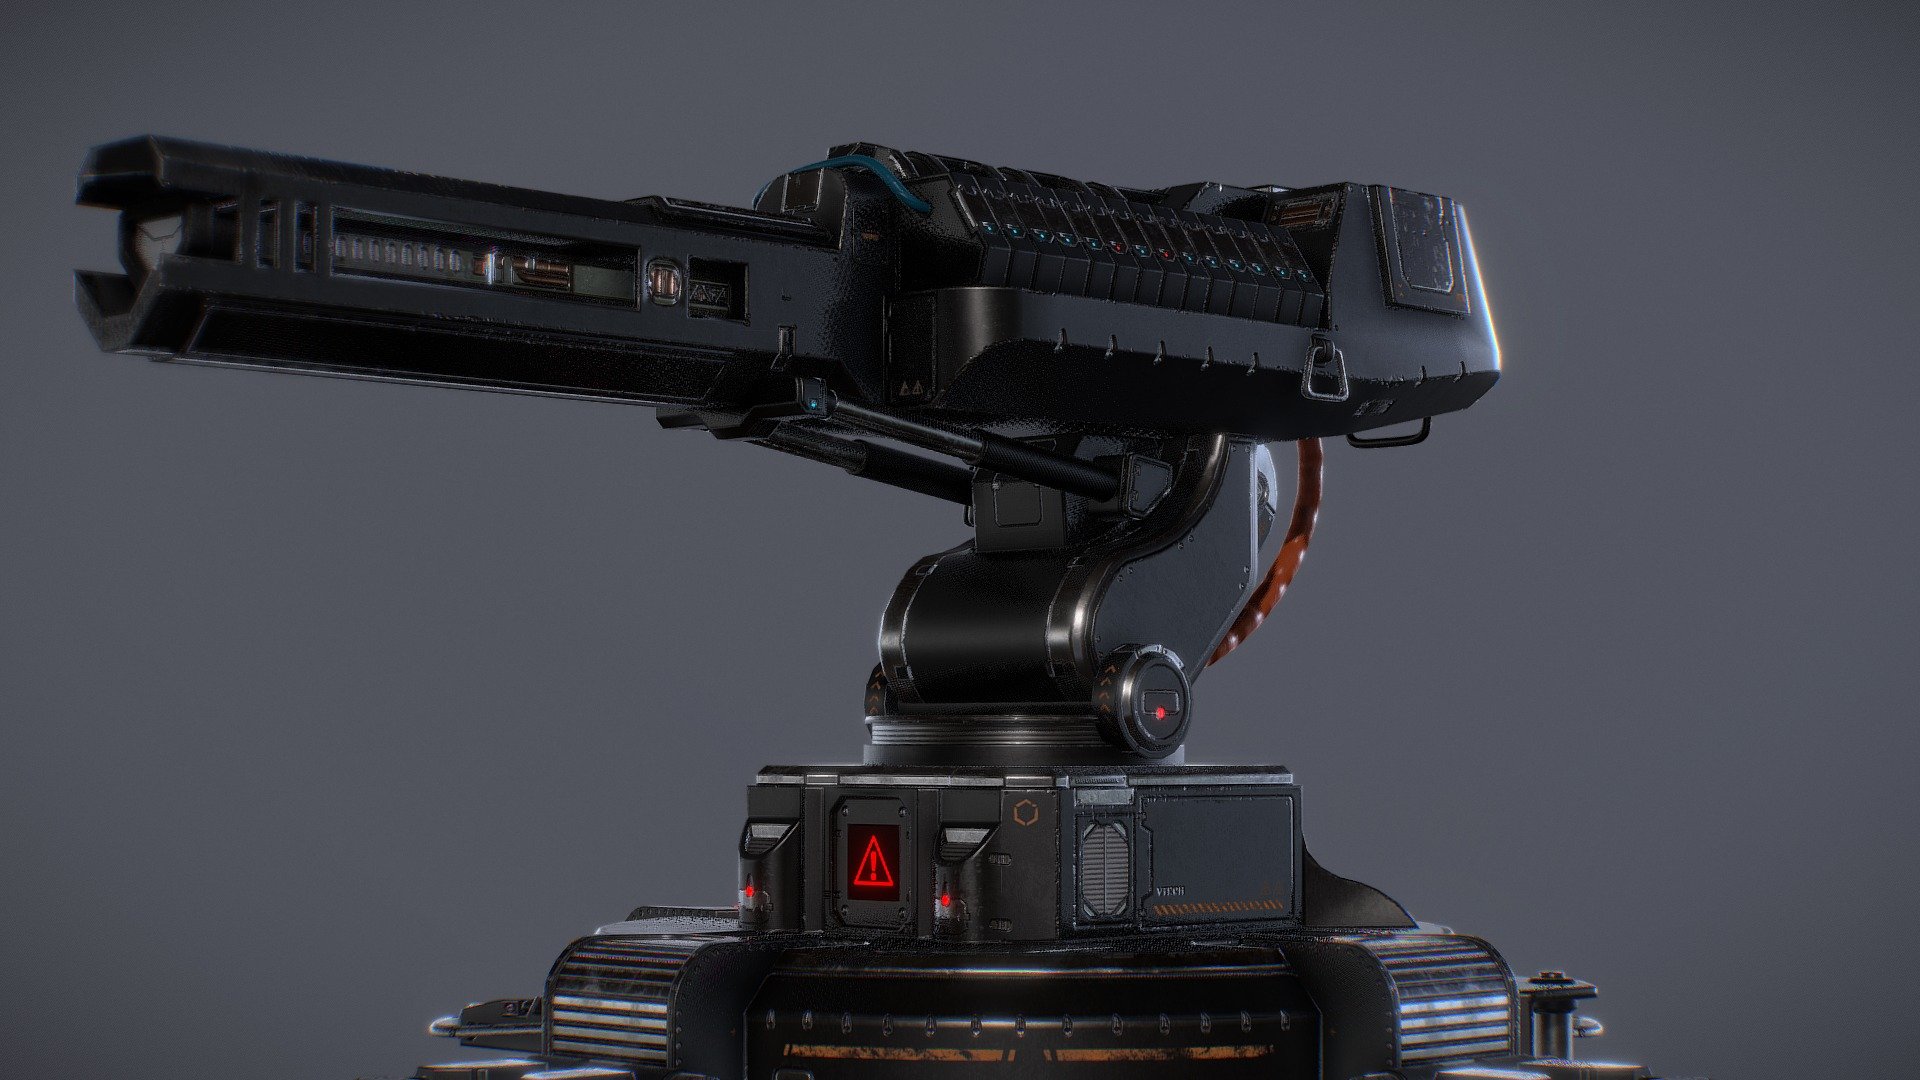 https://www.artstation.com/artwork/o305J
Felt a bit sci-fi this week and made a Gauss sci-fi turret, with of course a lot of cool glowy lights and metal plates.

The turret is game ready, its height is around 15m, and has 3 texture sets ( I could've used 2, just wanted the extra detail), packing 17k trists 3d model